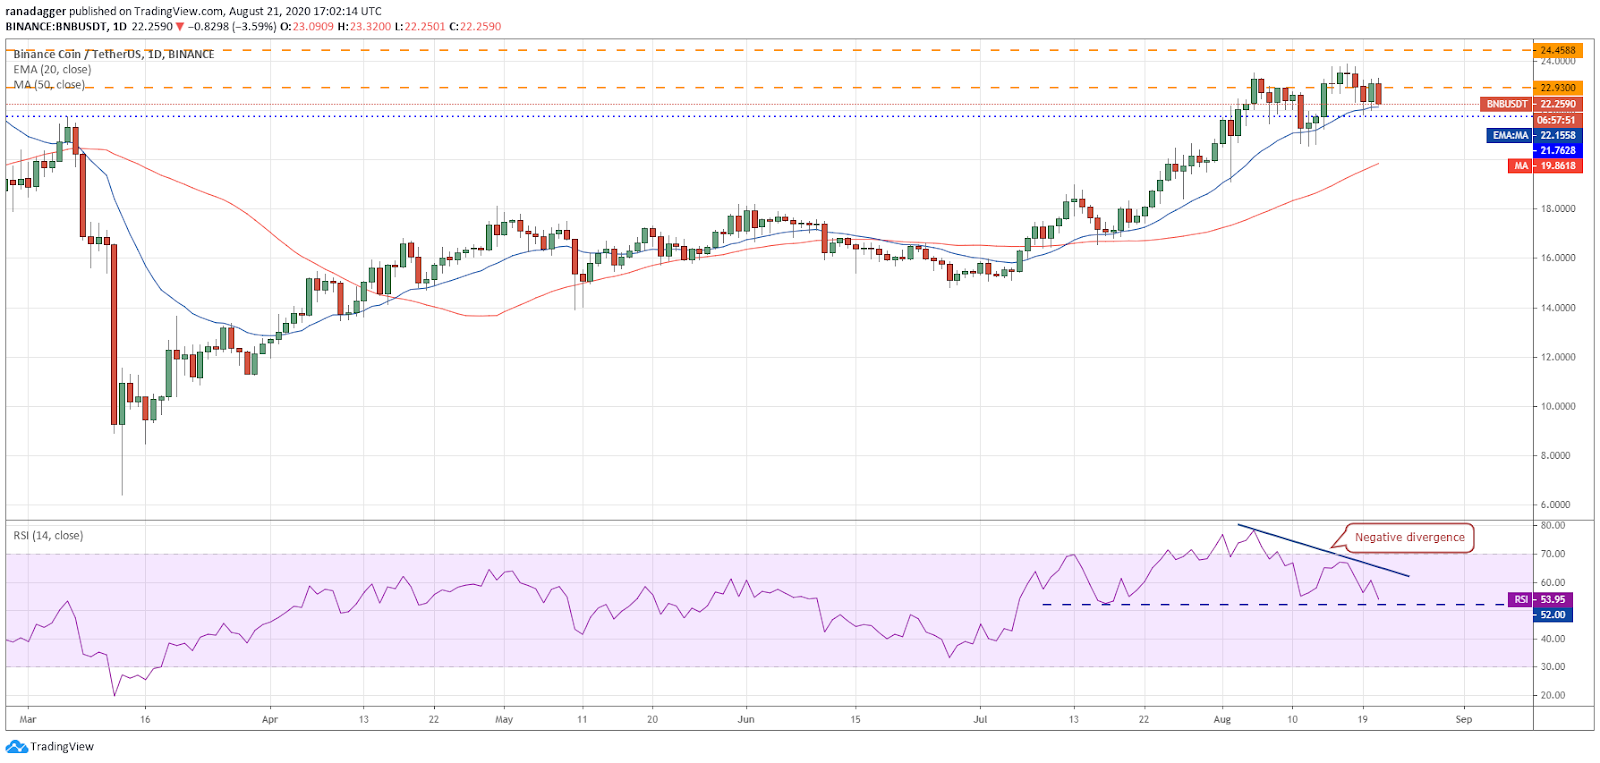 BNB/USD daily chart. Source: TradingView